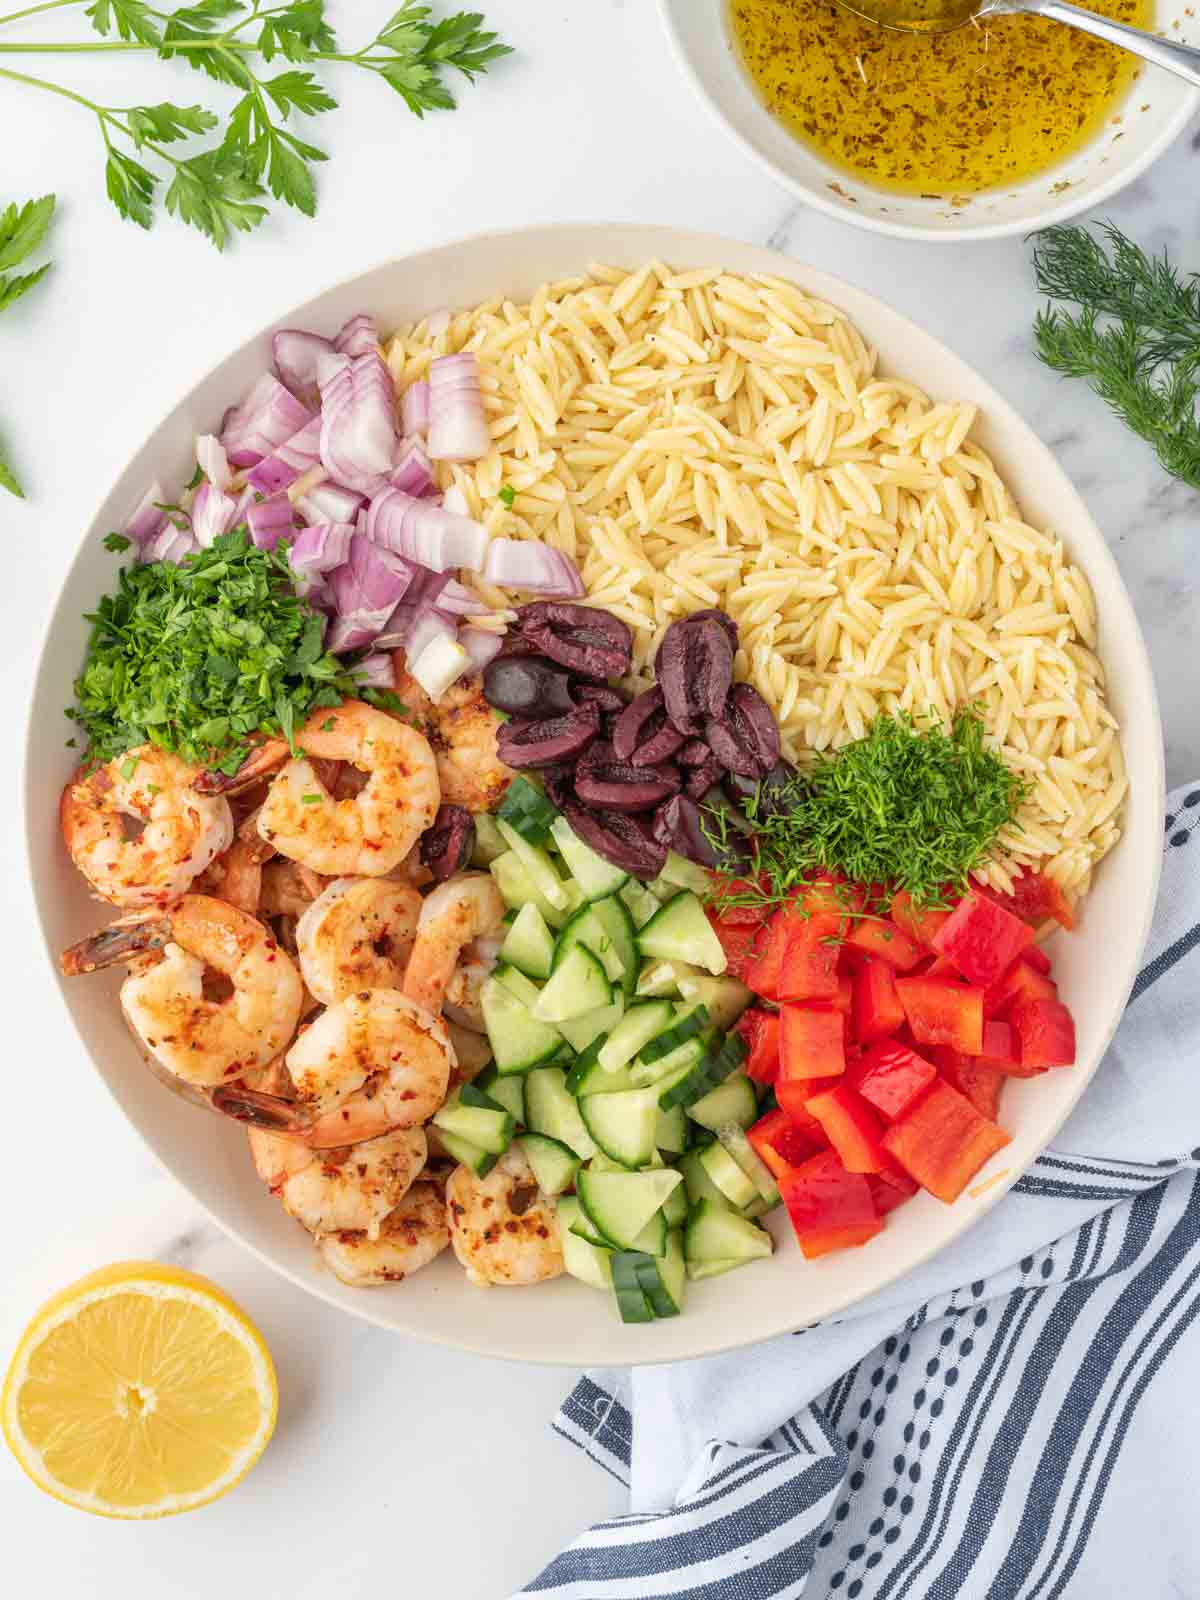 How to build an orzo salad with grilled shrimp in a bowl.